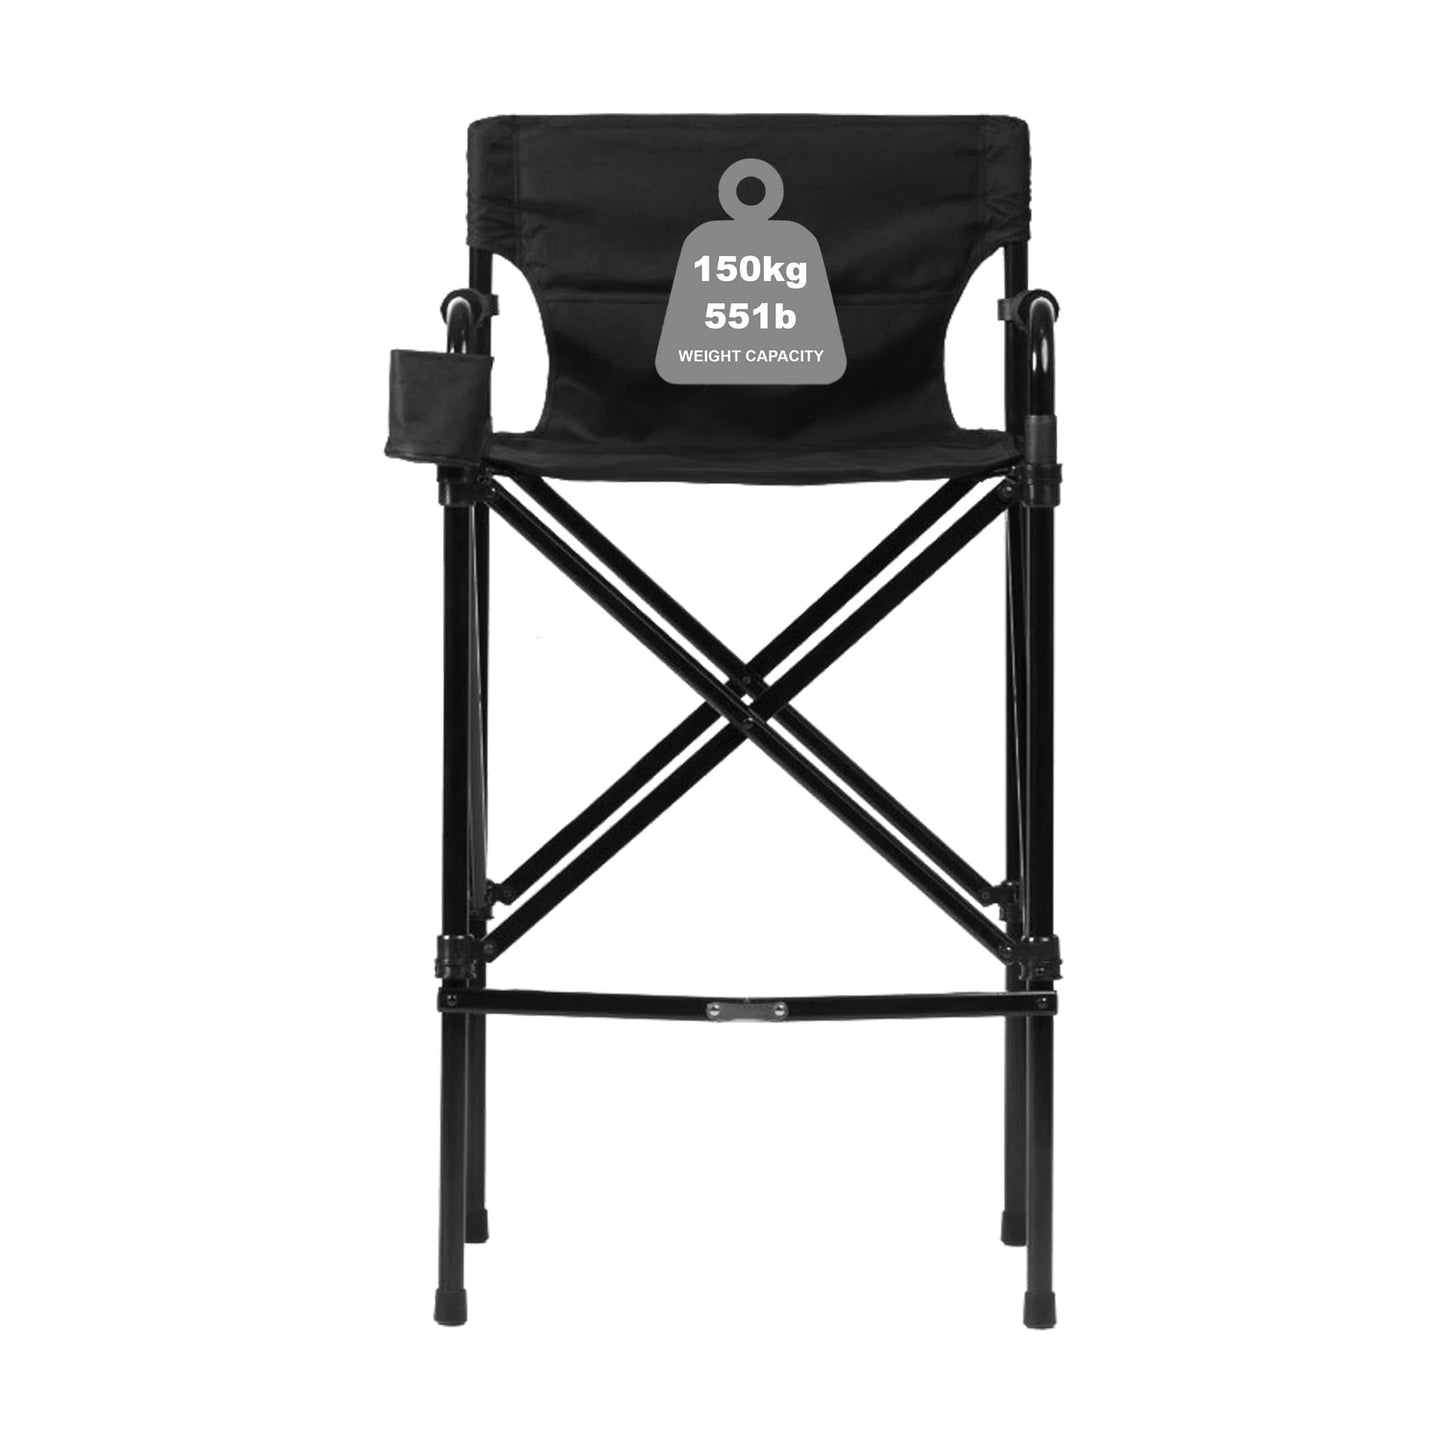 The Ultimate Makeup Chair Portable & Lightweight